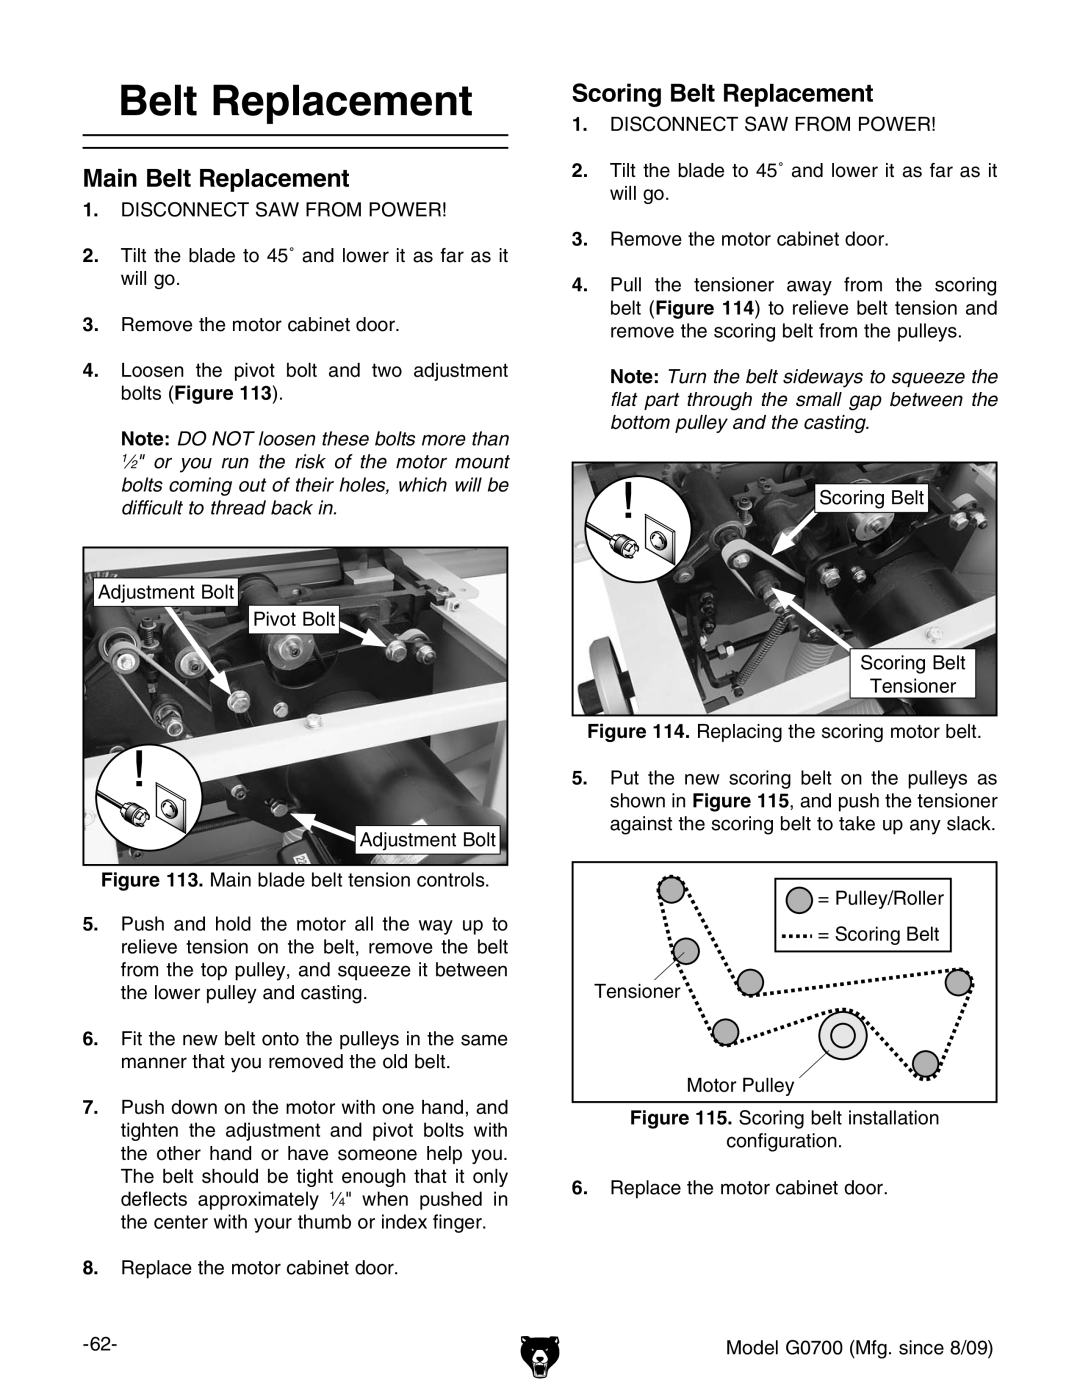 Grizzly G0700 owner manual Main Belt Replacement, Scoring Belt Replacement 